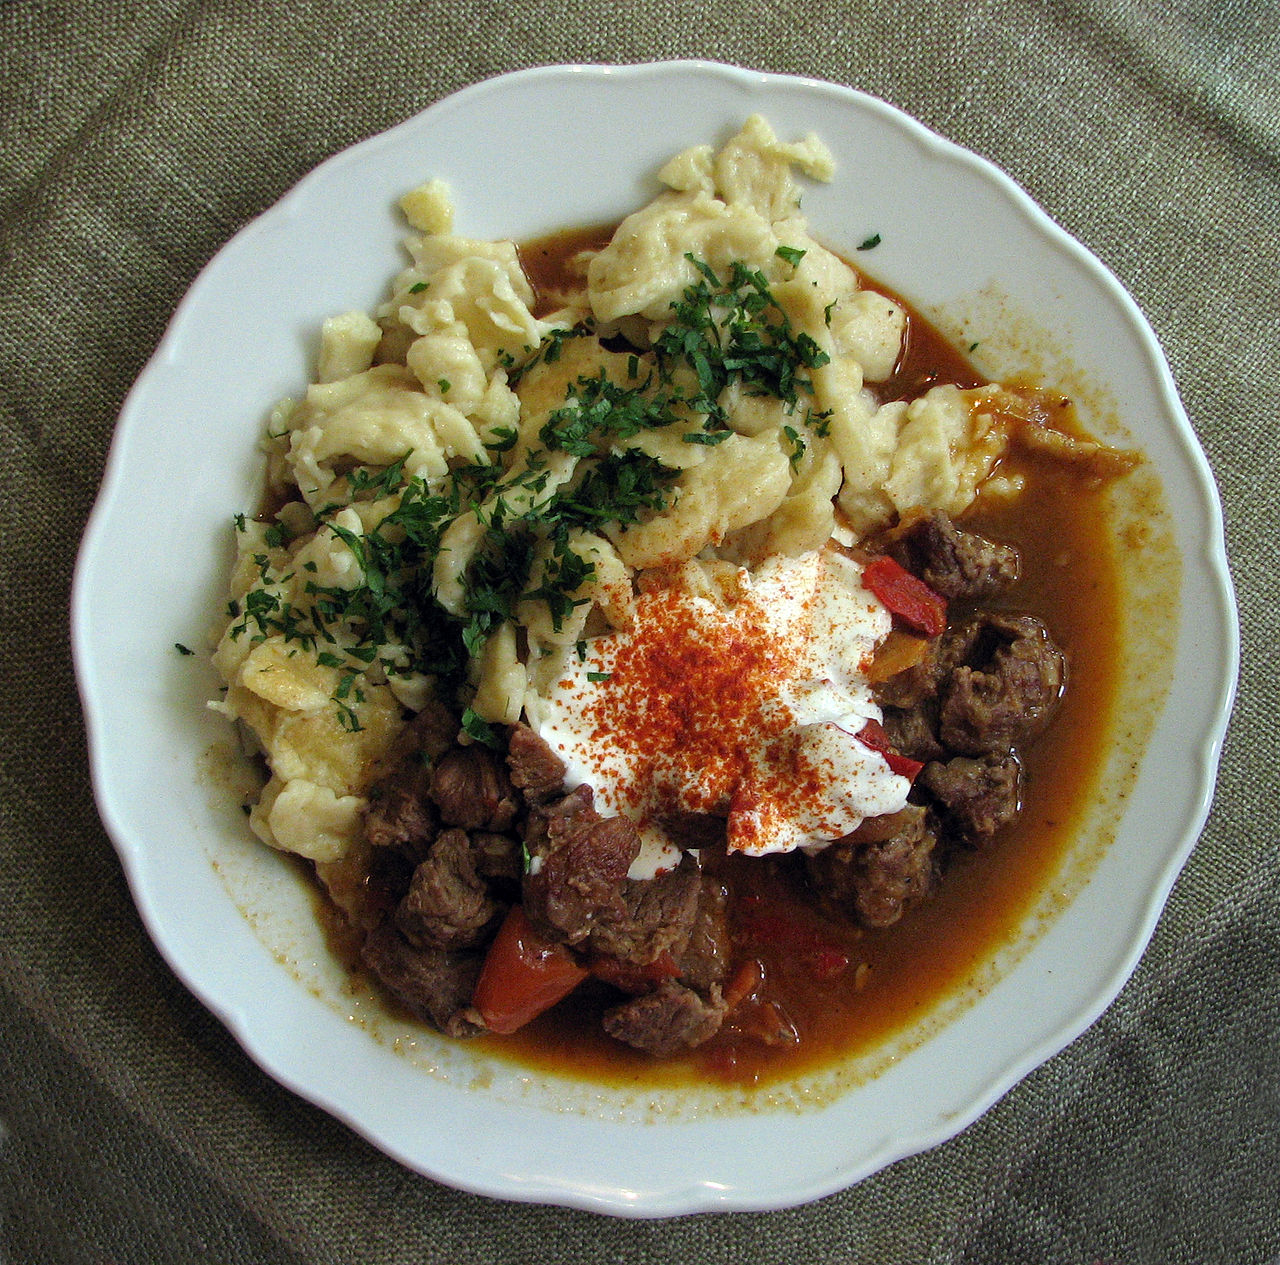 Hungarian Gulyás with a side of spaetzle. Photo from Wikipedia.